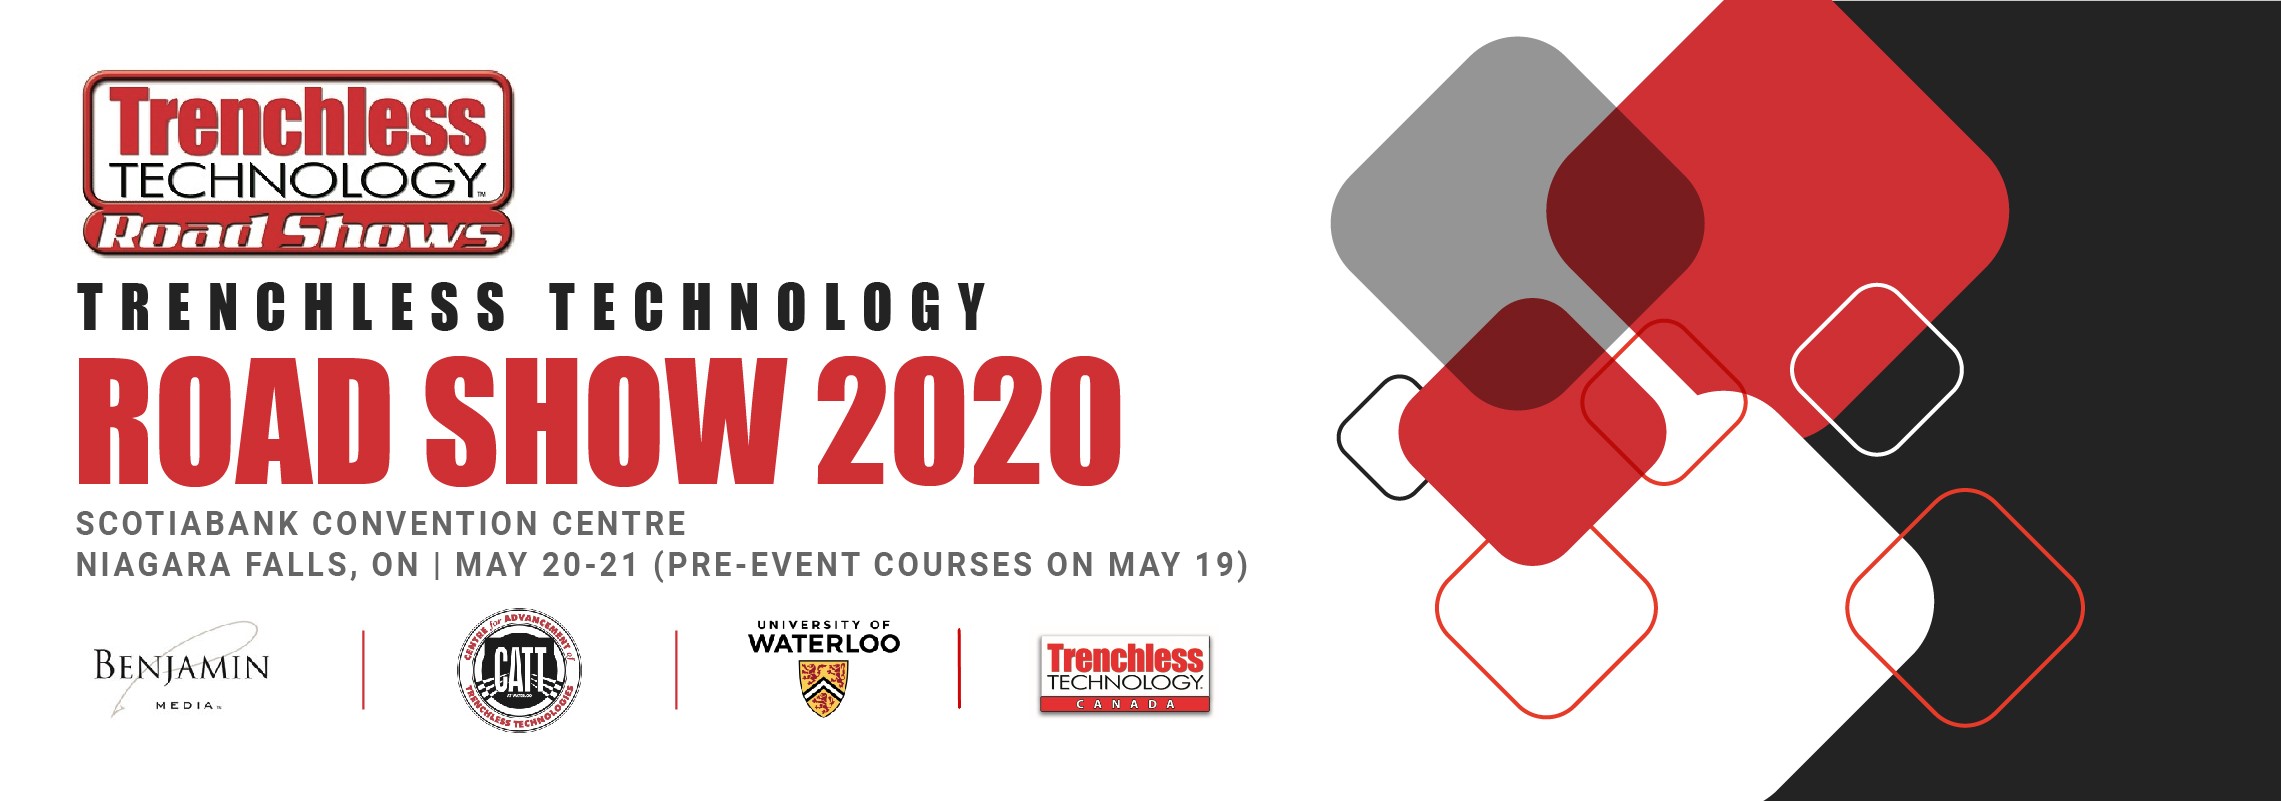 2020 Niagara Falls Trenchless Technology Road Show